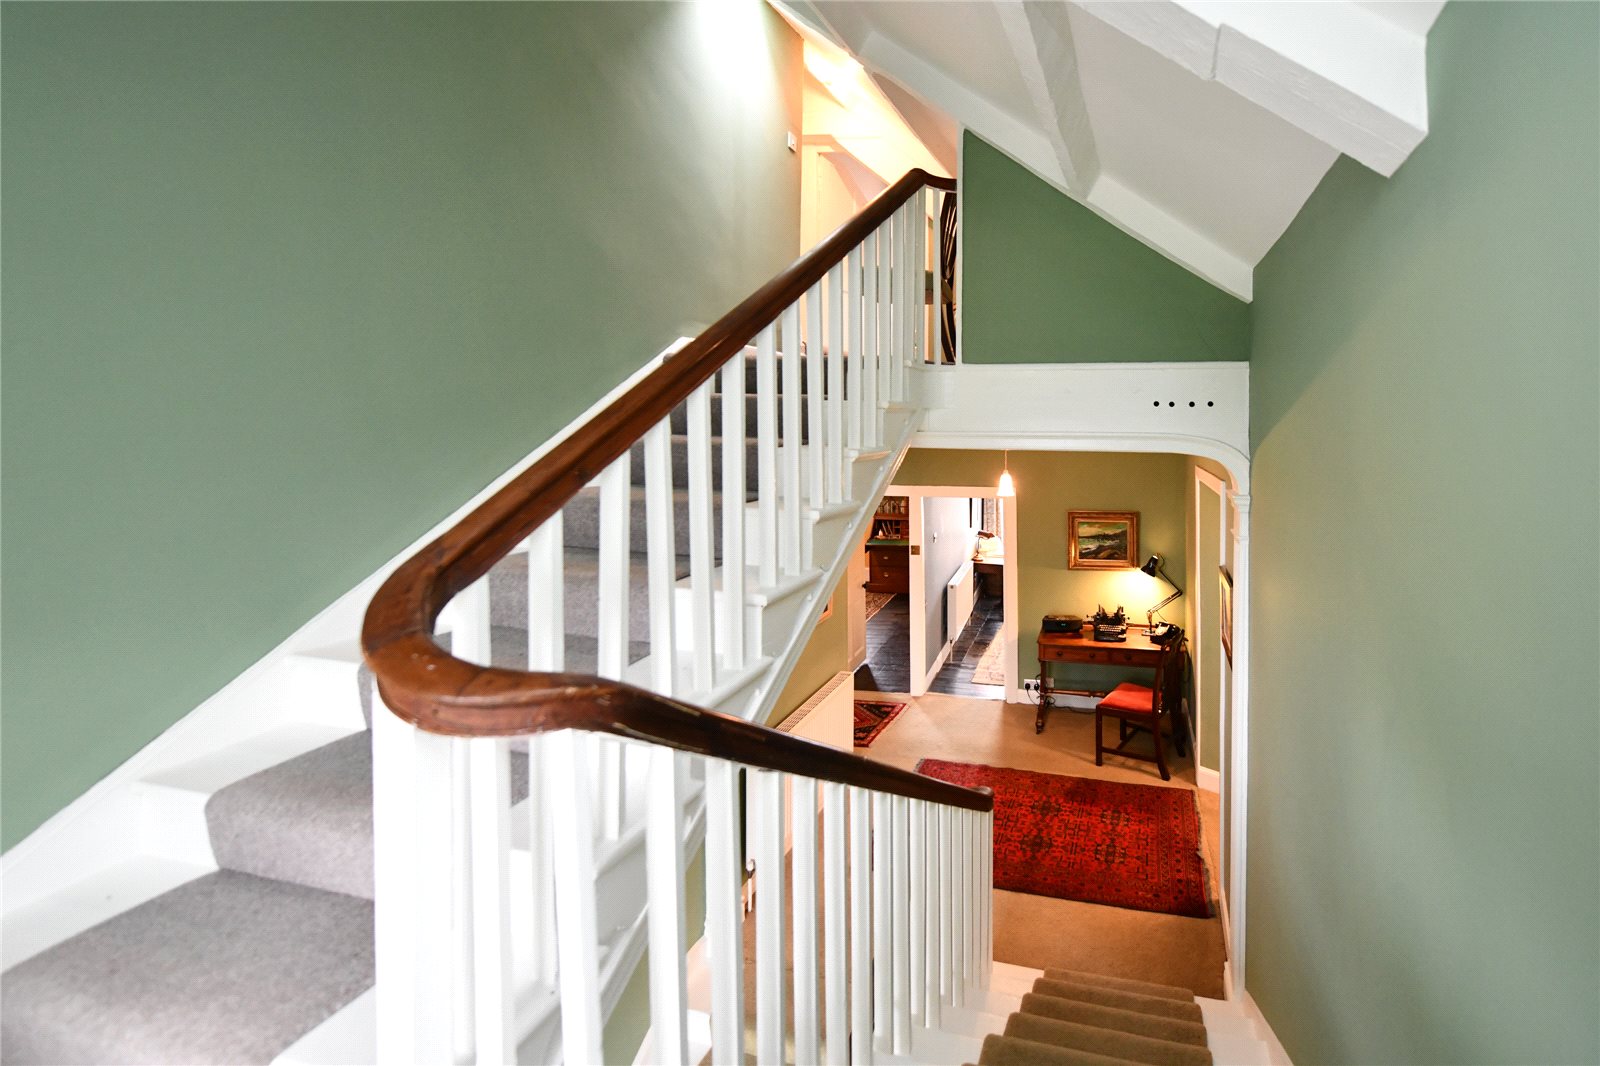 Stairs To 2nd Floor